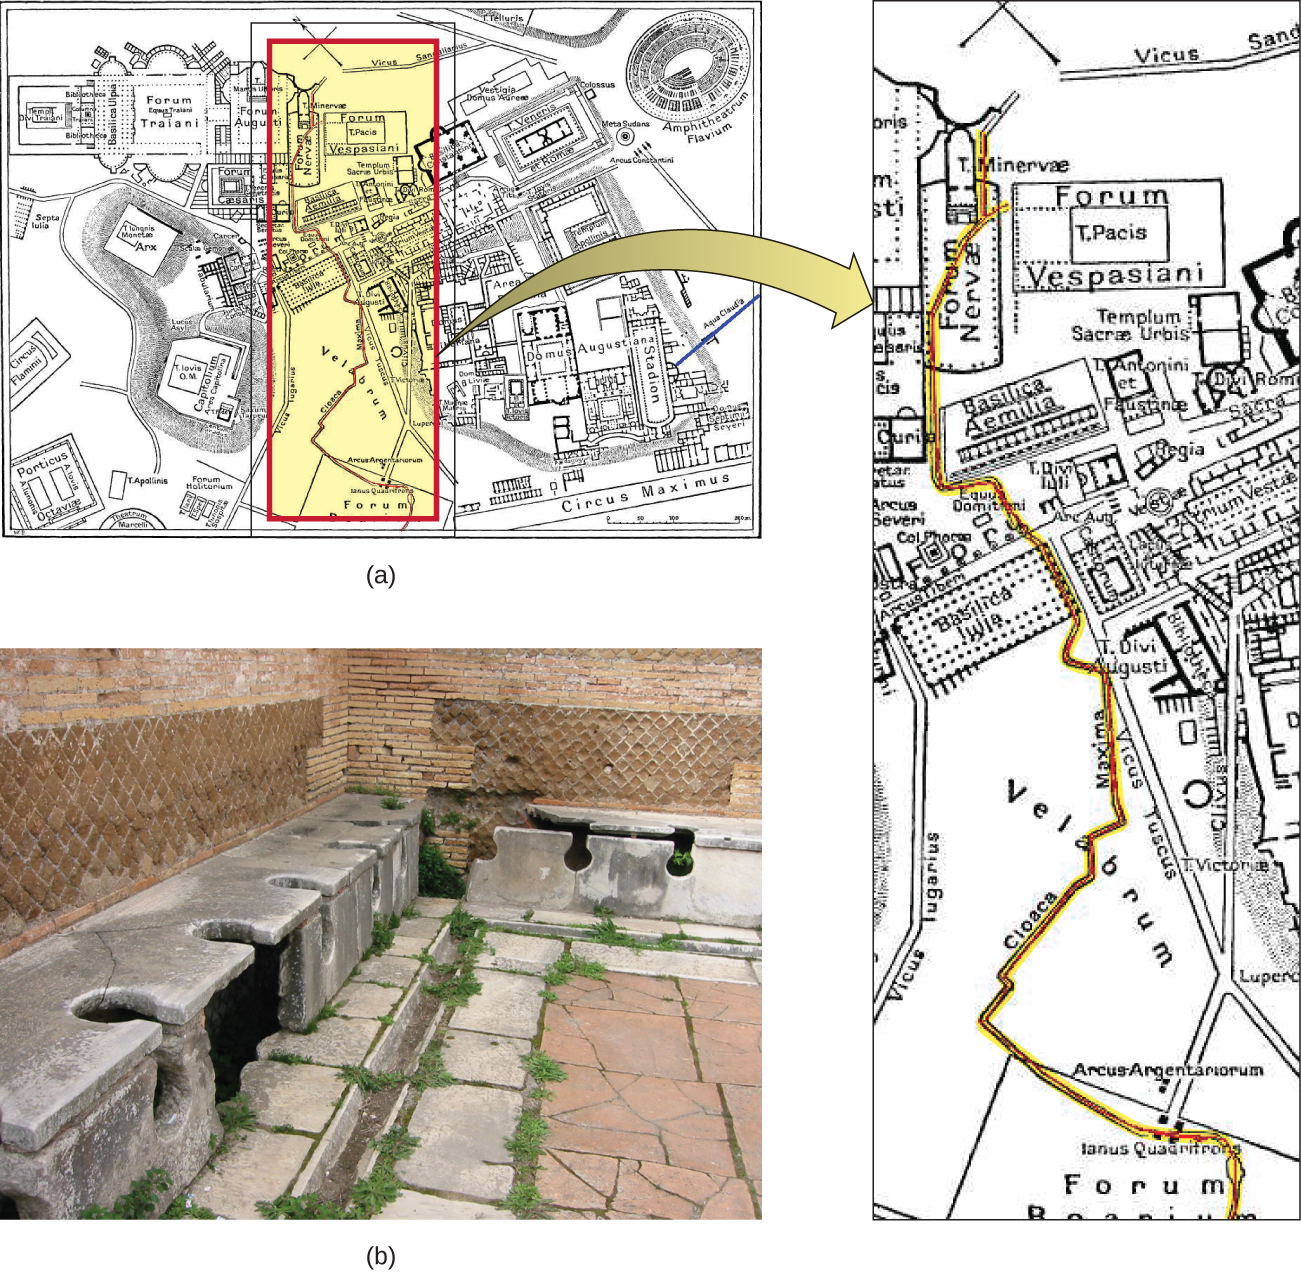 Figure a is a map of ancient Rome, showing the first sewer, which ran through the centre of the city. Figure b shows ancient latrines that carried waste away from the city and into the river Tiber.